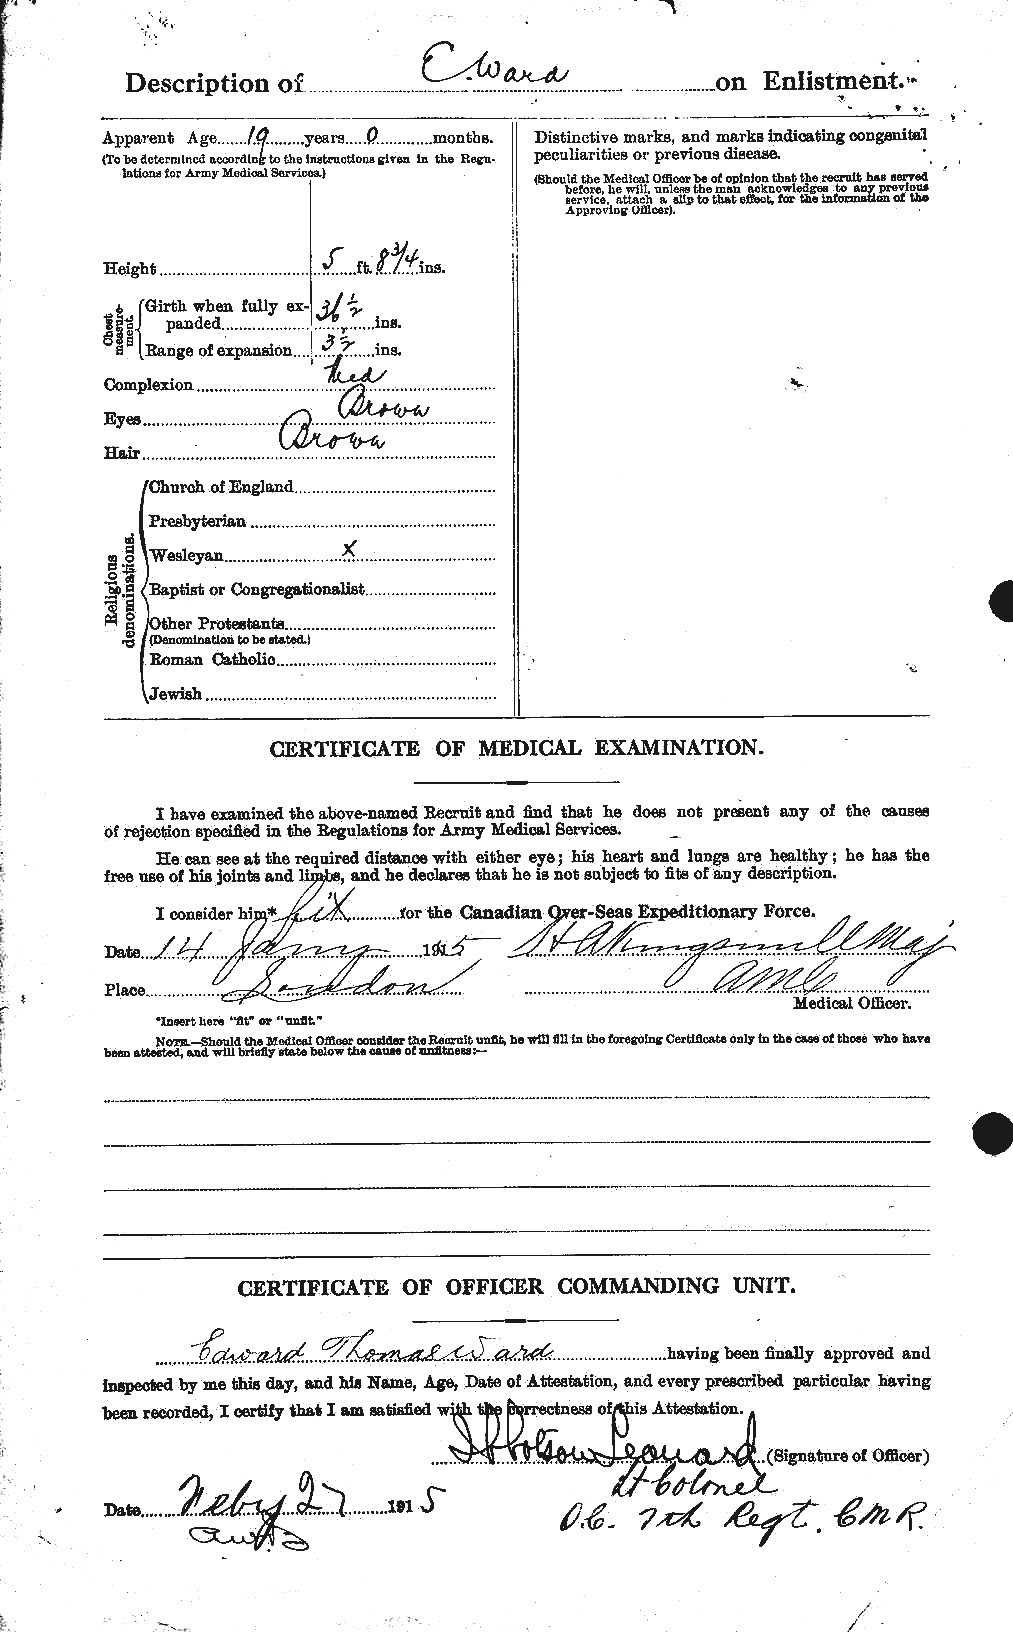 Personnel Records of the First World War - CEF 657657b